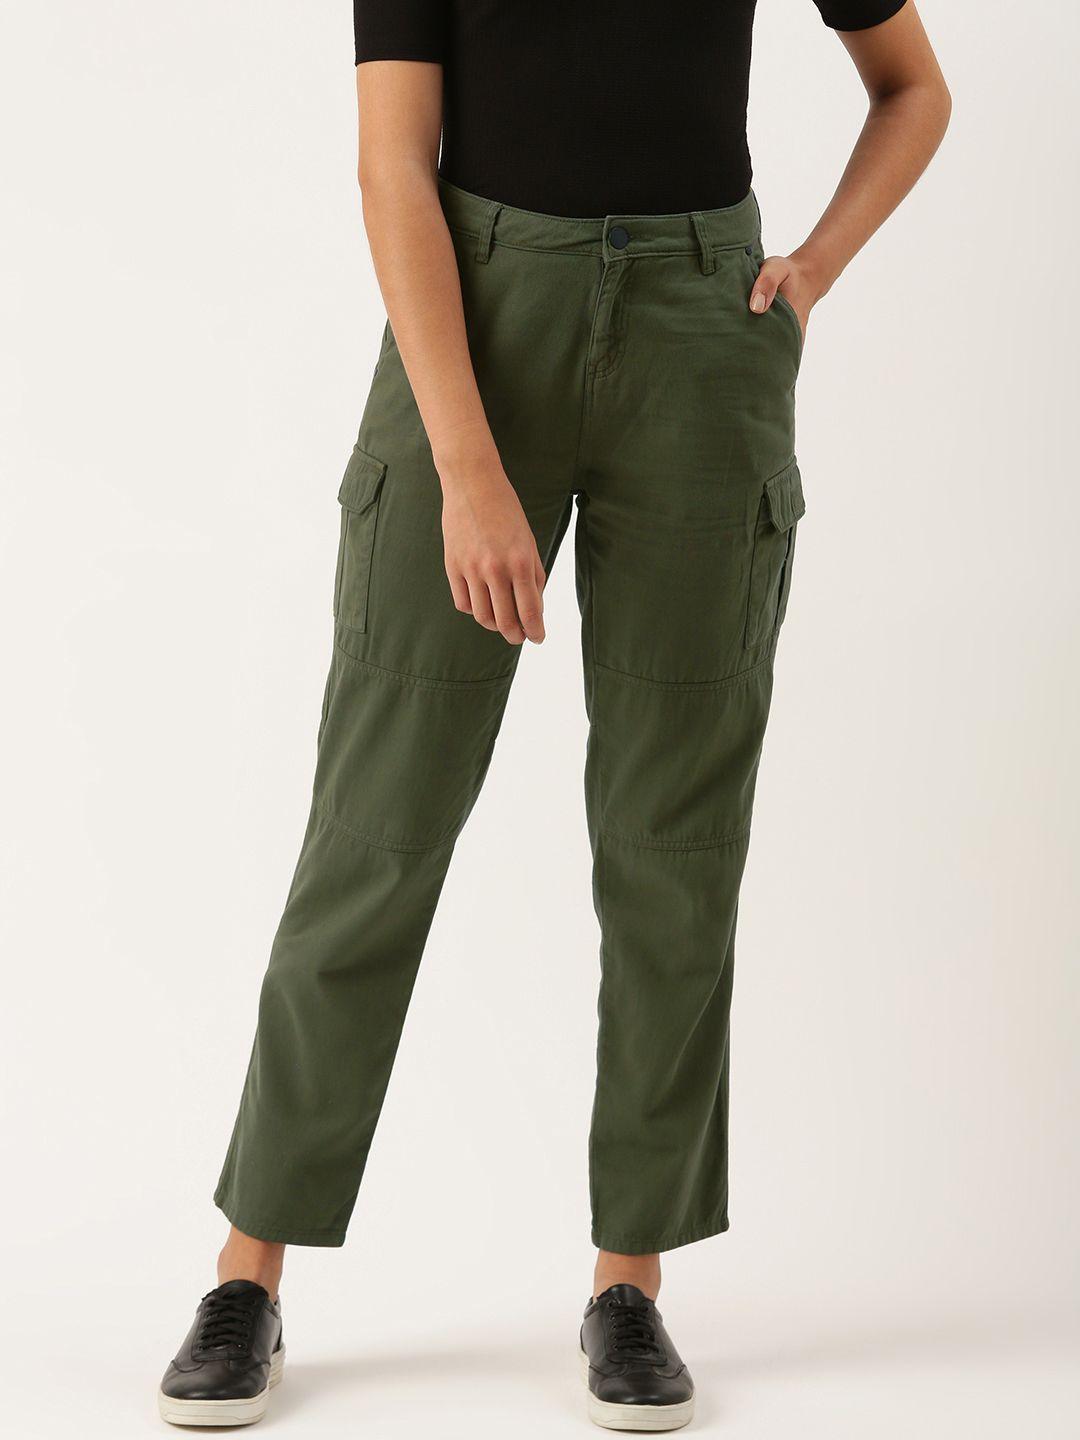 ivoc women olive green solid pure cotton mid-rise slim fit cargos trousers